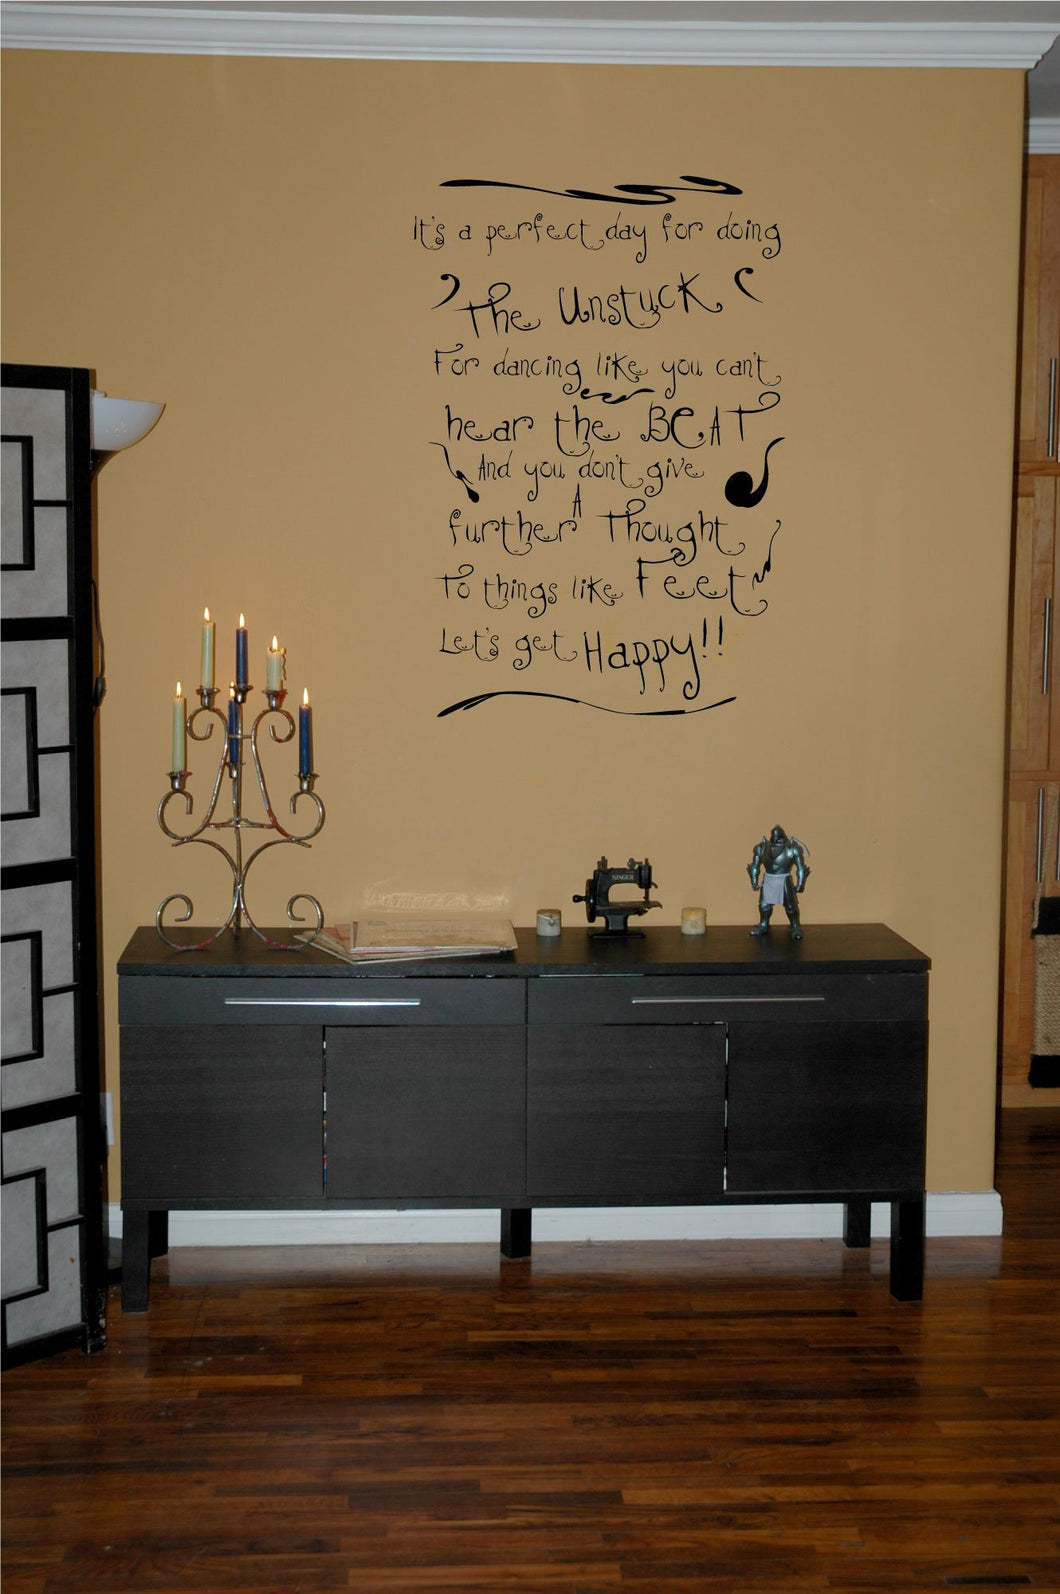 Doing The Unstuck - The Cure Song Lyrics Vinyl Wall Decal - Pillbox Designs